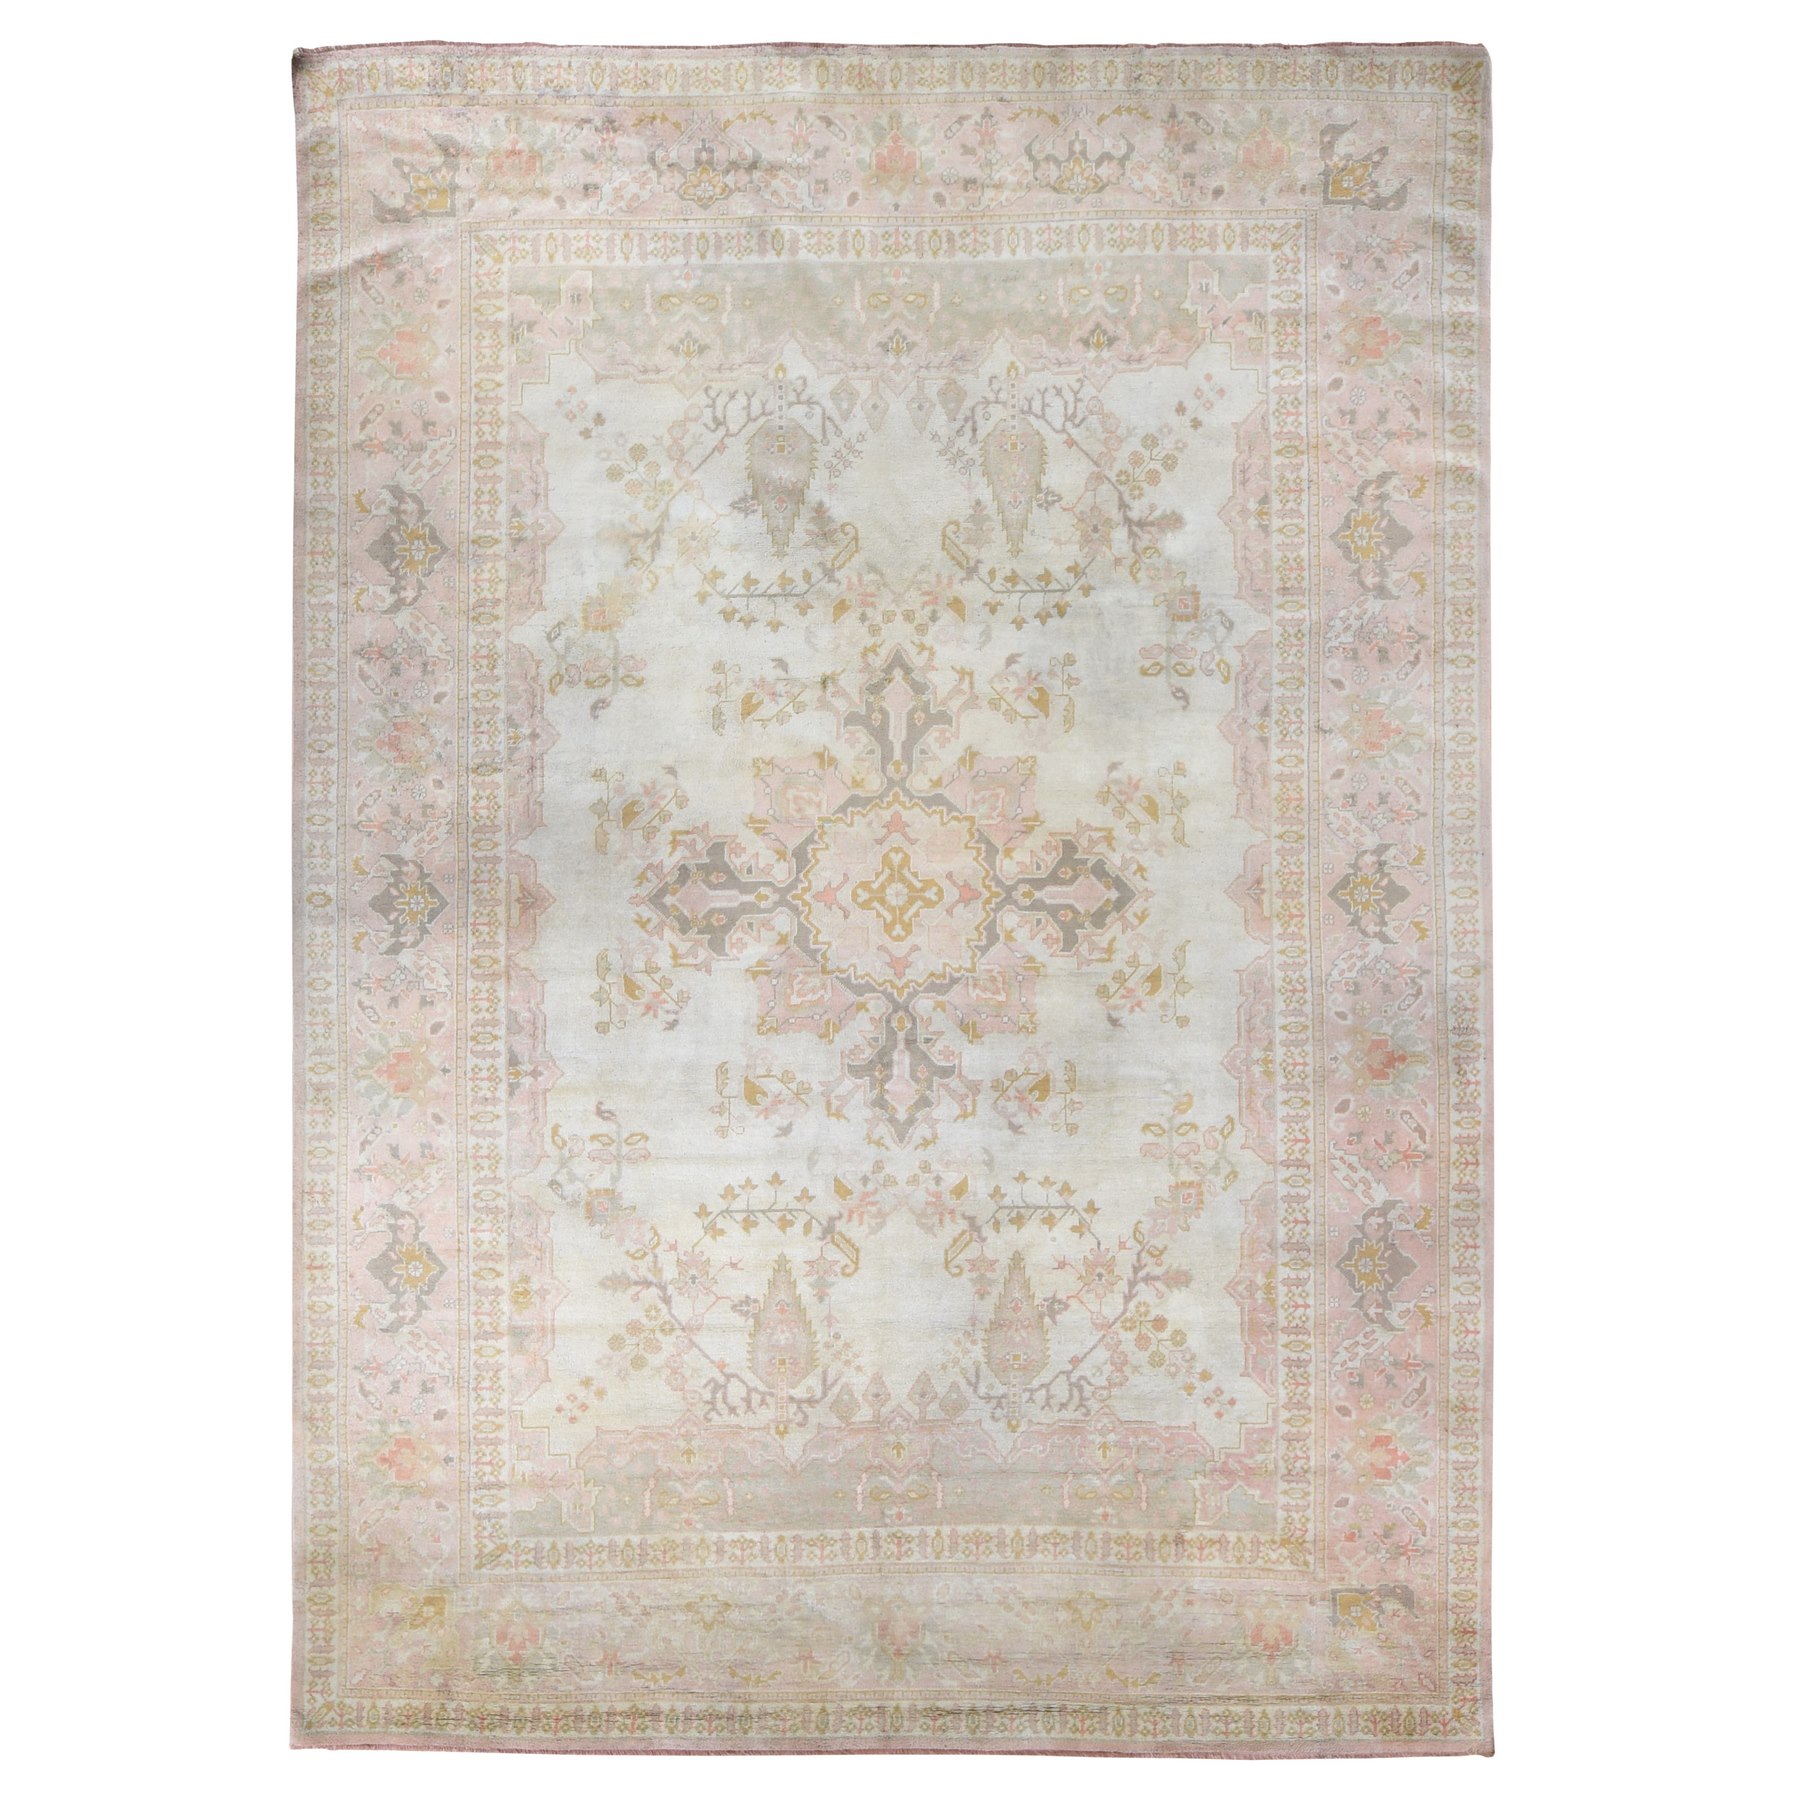 11'x16' Cream Color, Antique Turkish Oushak with Soft Pastel Colors, Clean, Nice Soft Pile Throughout, Sides and Edges Professionally Secured, Hand Woven, Pure Wool Oversized Oriental Rug 